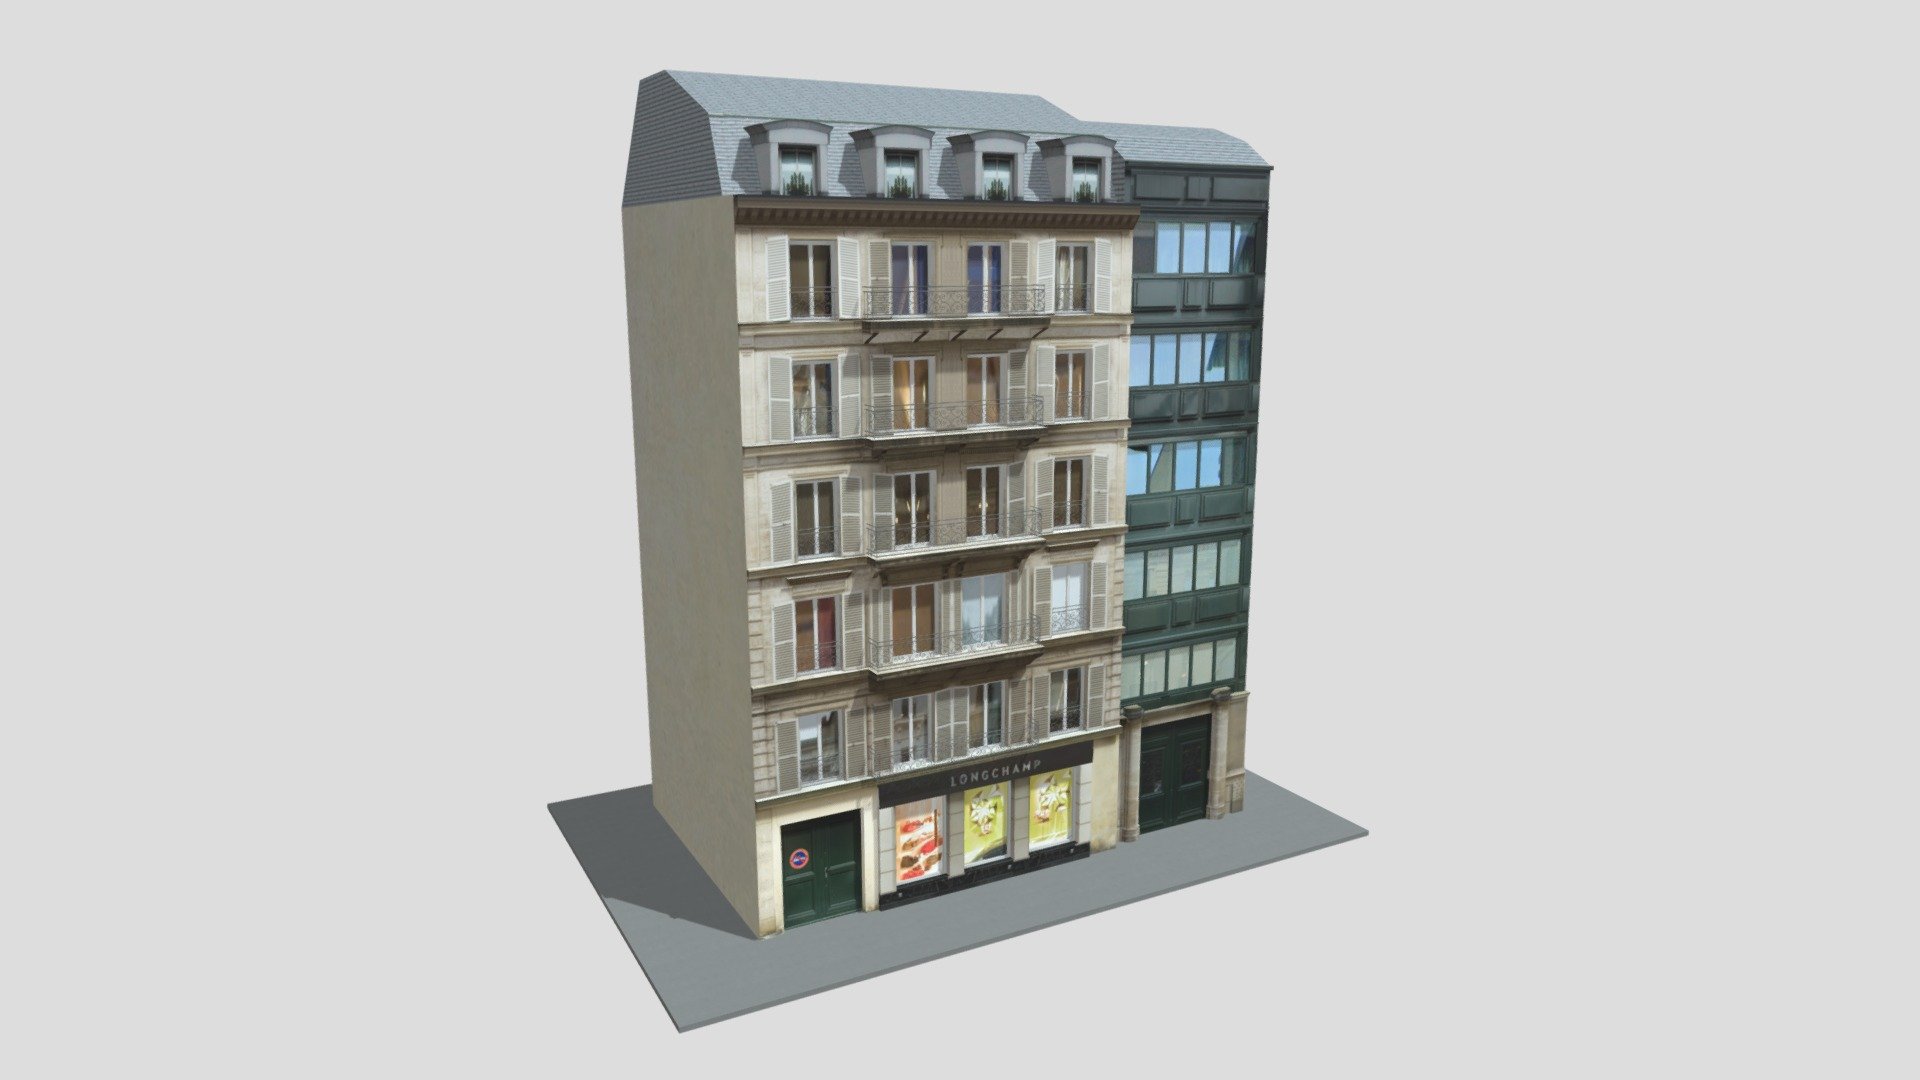 Typical Paris Building 02
Originally created with 3ds Max 2015 and rendered in V-Ray 3.0

Total Poly Counts:
Poly Count = 68412
Vertex Count = 69159 - Typical Paris Building 02 - 3D model by nuralam018 3d model